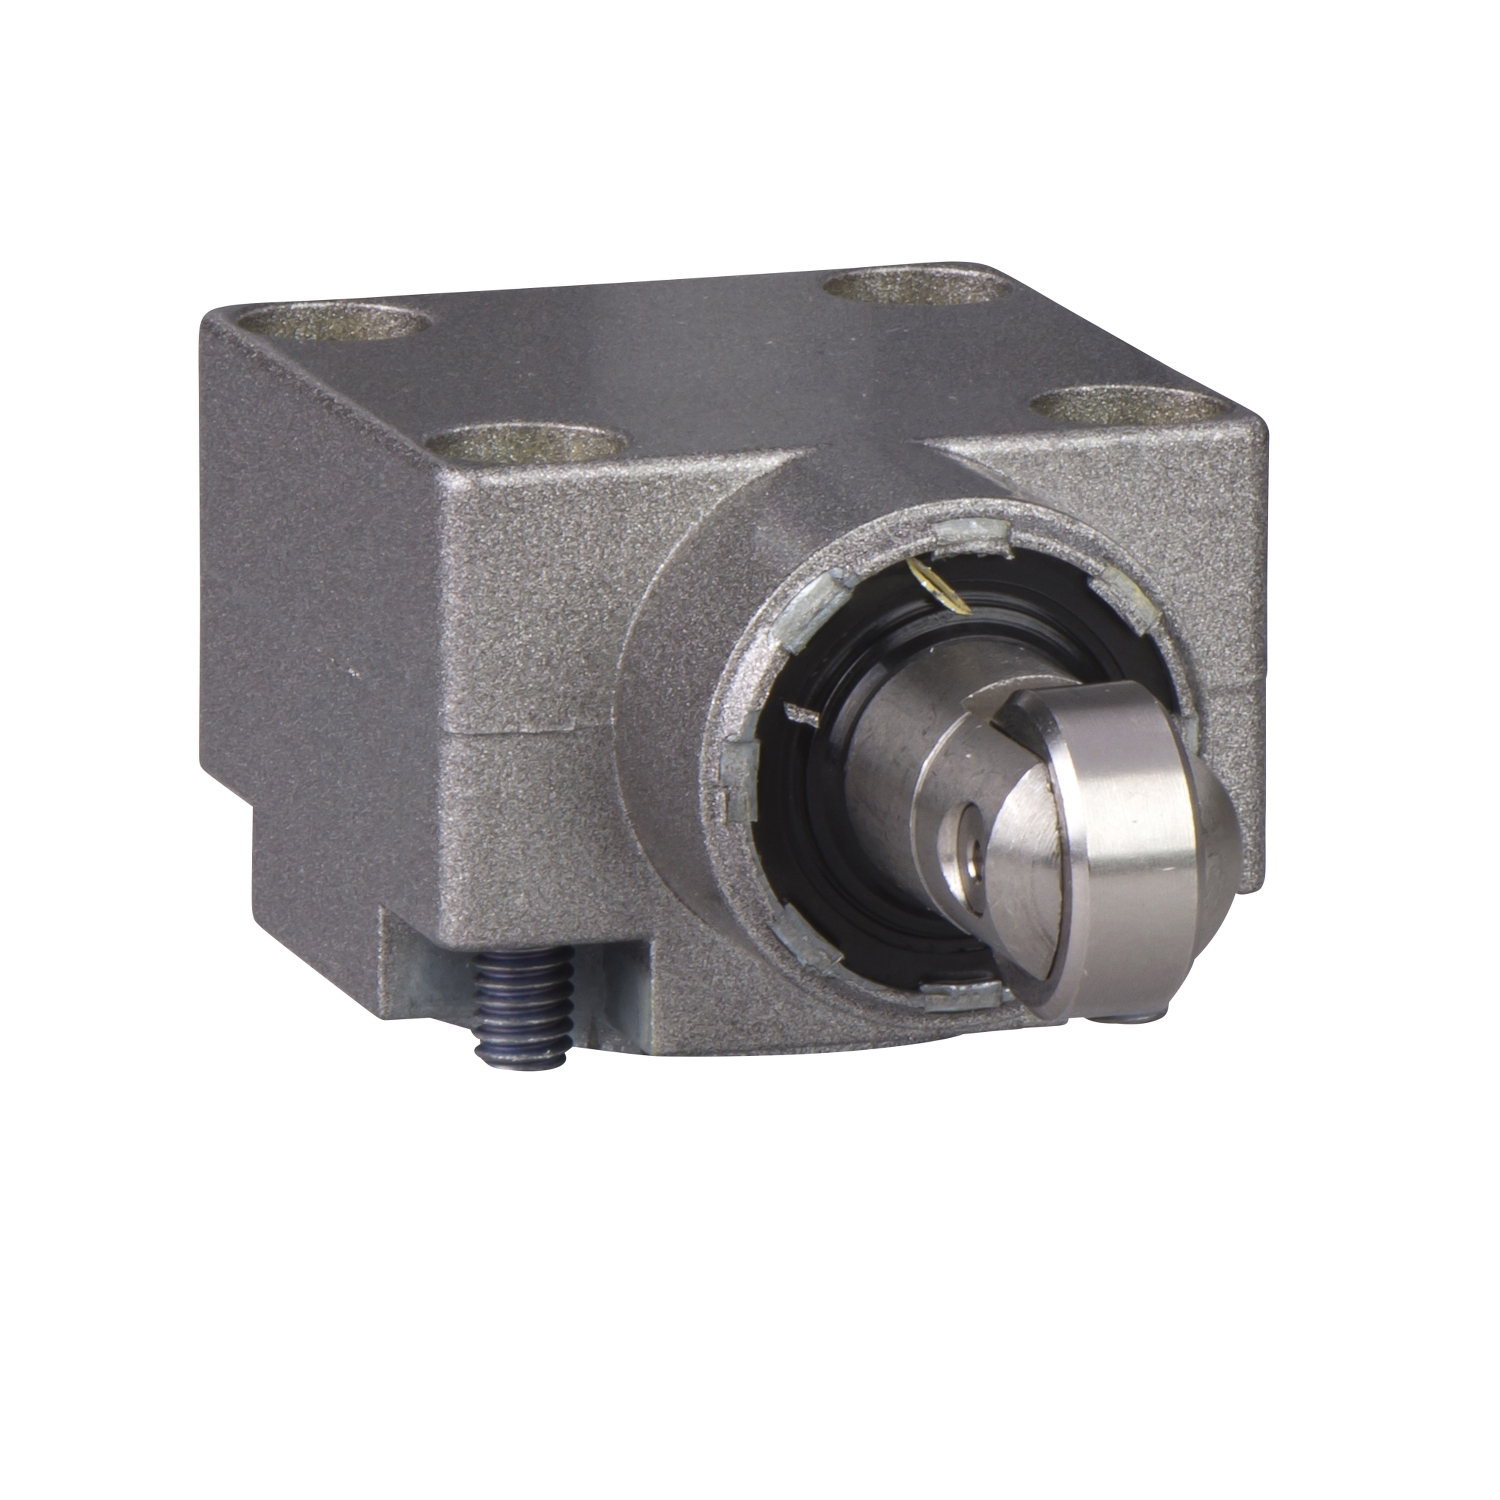 Limit switch head, Limit switches XC Standard, ZCKE, metal side plunger with vertical roller